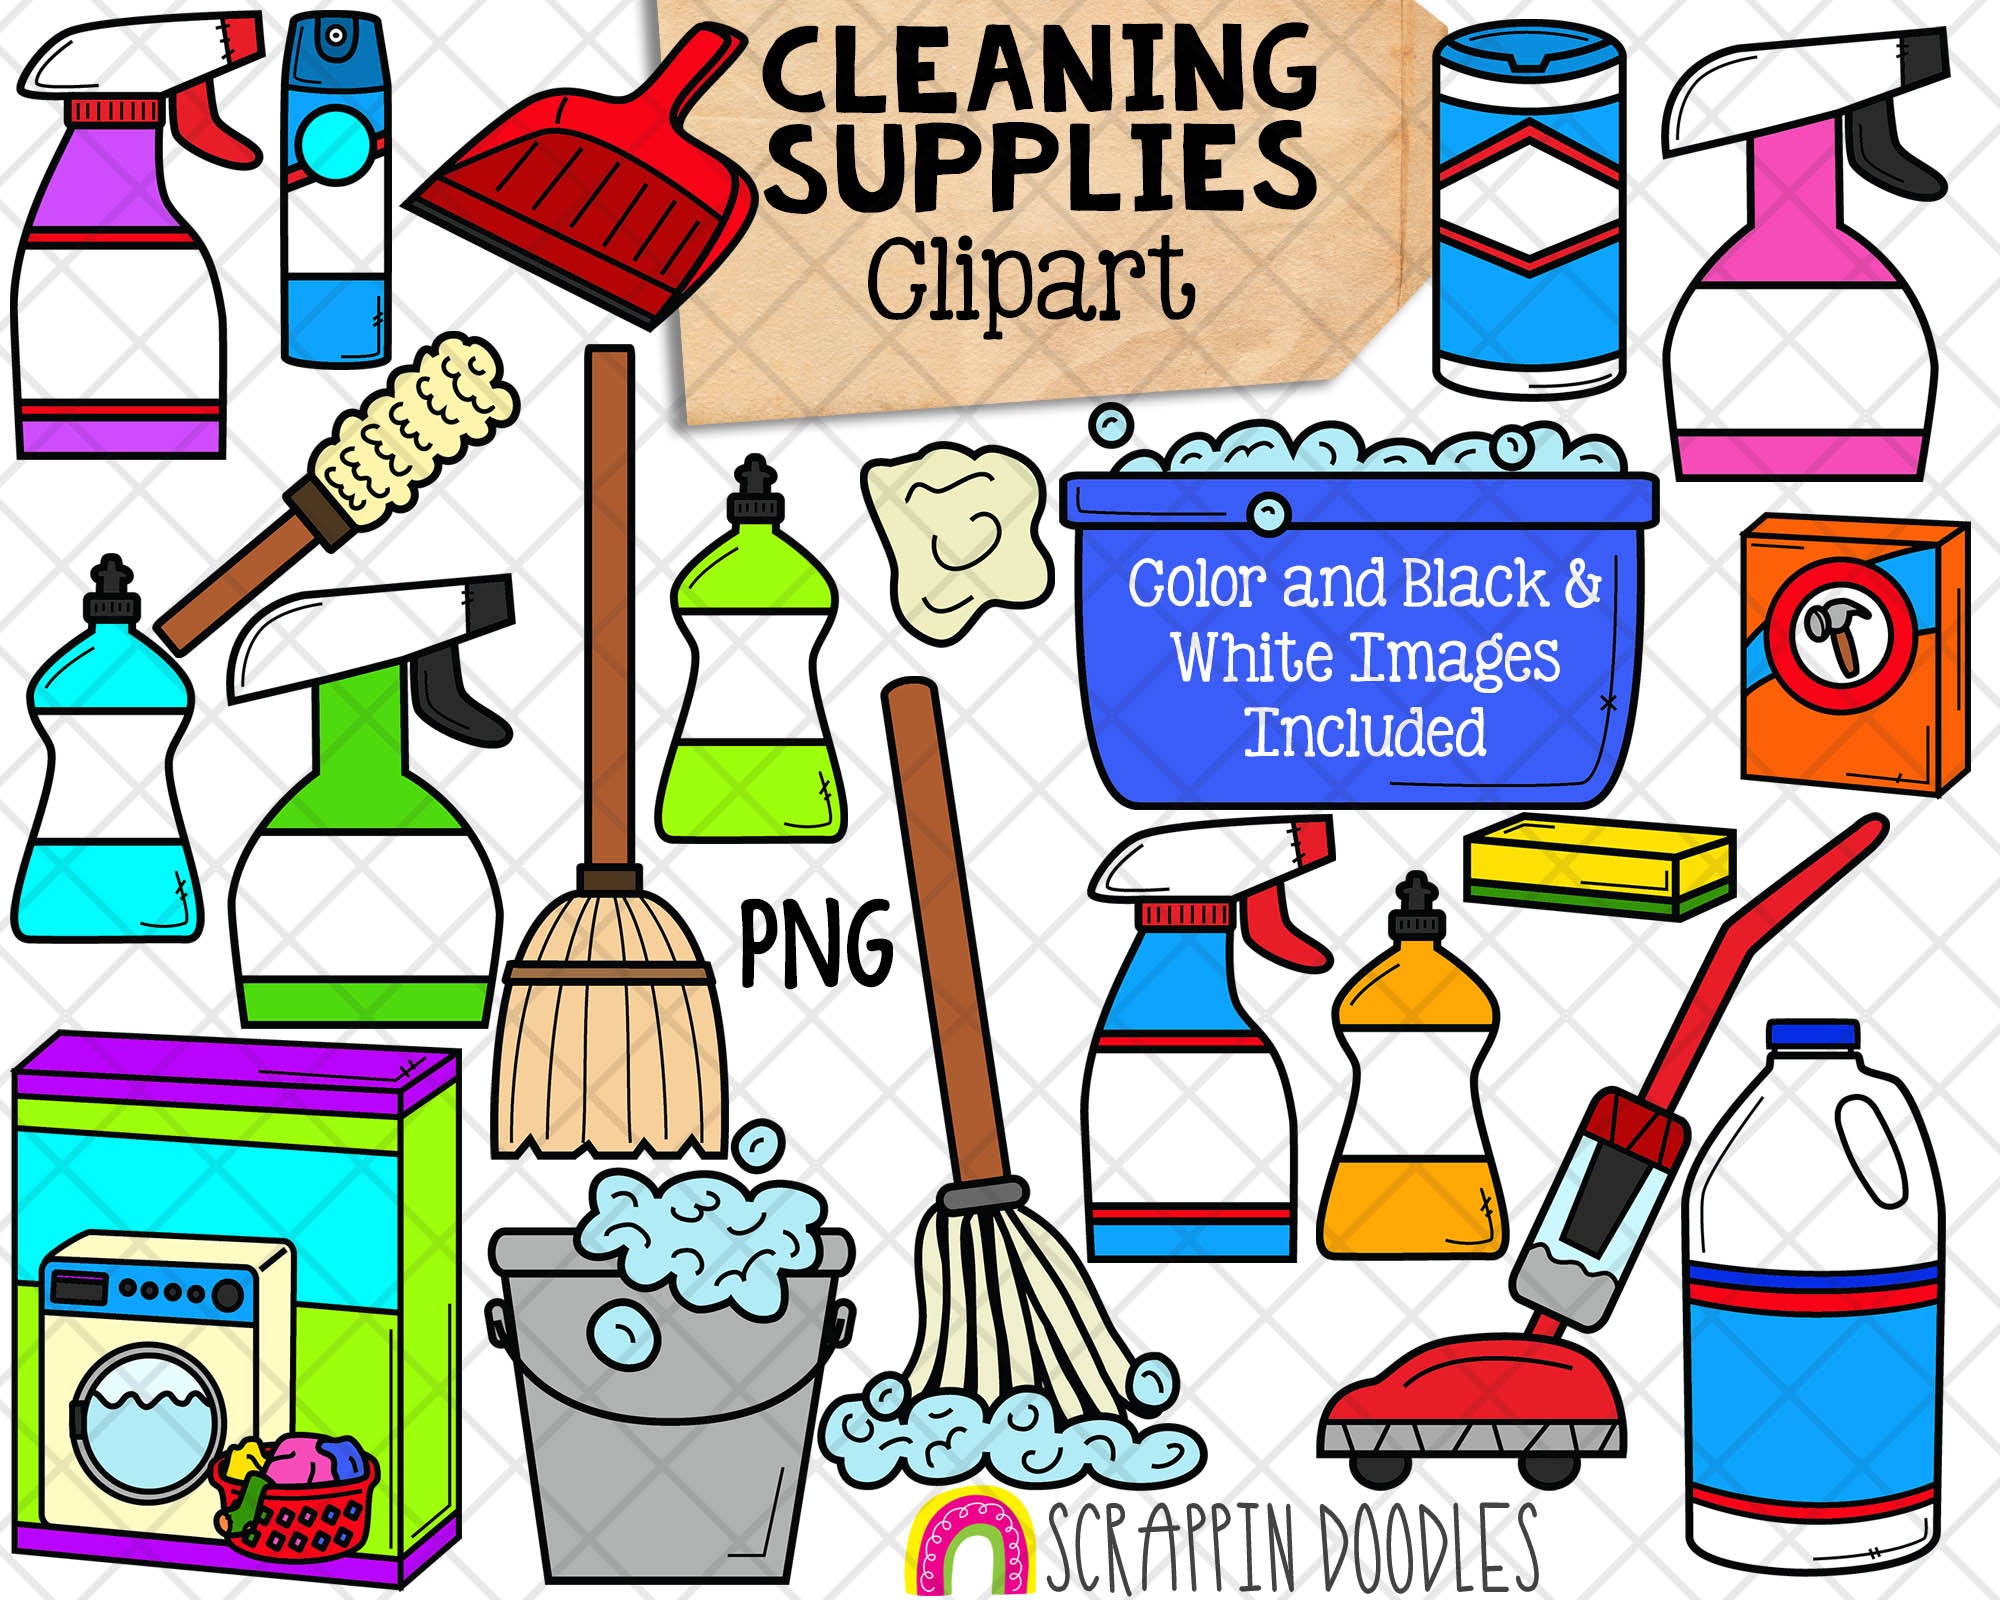 http://www.scrappindoodles.ca/cdn/shop/products/CleaningSupplies_ClipArt.jpg?v=1666208825